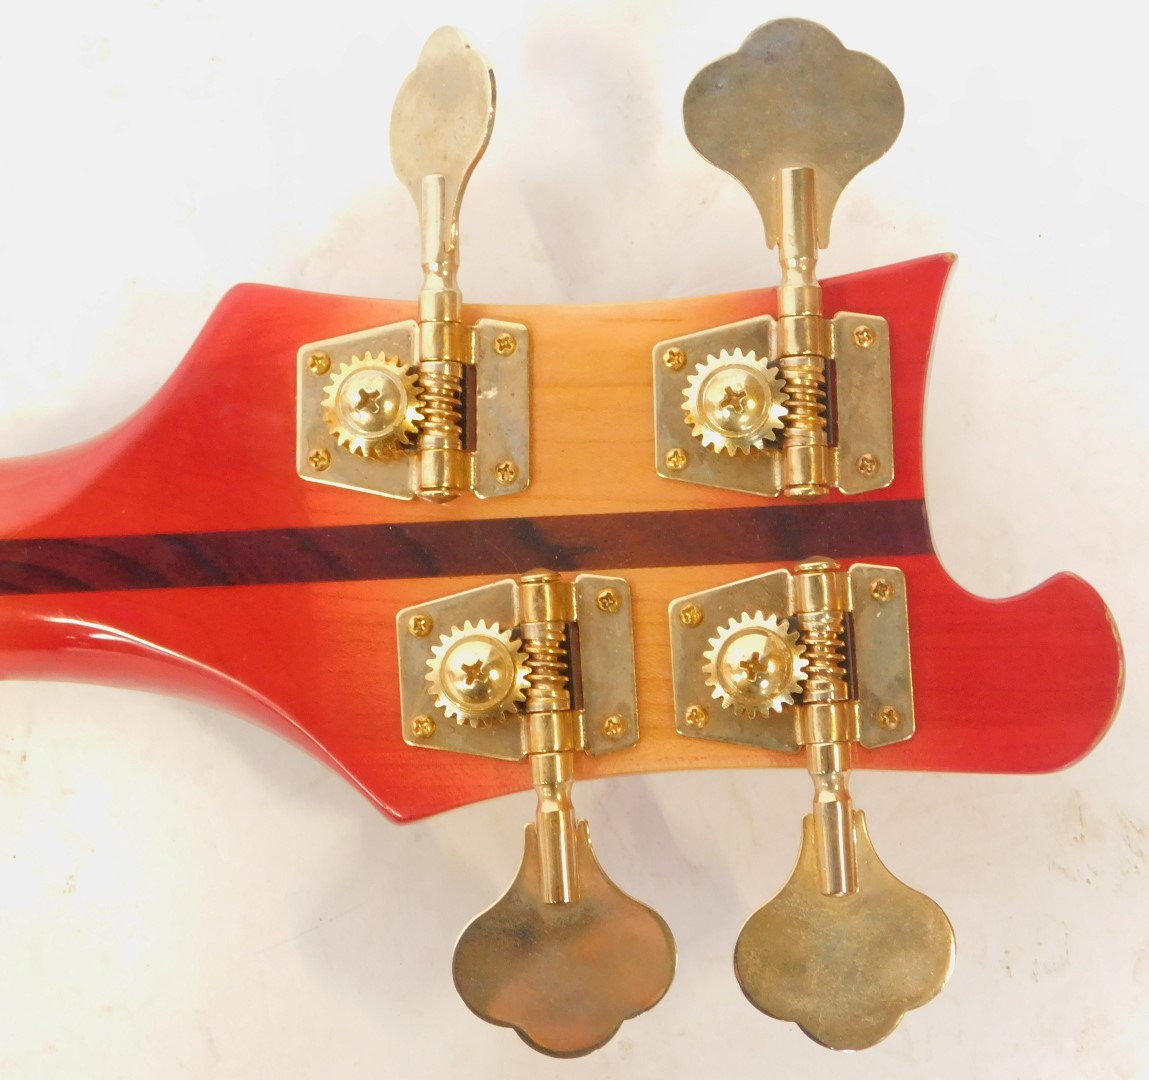 A Rirkenbacker electric bass guitar, the body in red, with the front panel fading to a yellow, the - Image 5 of 7